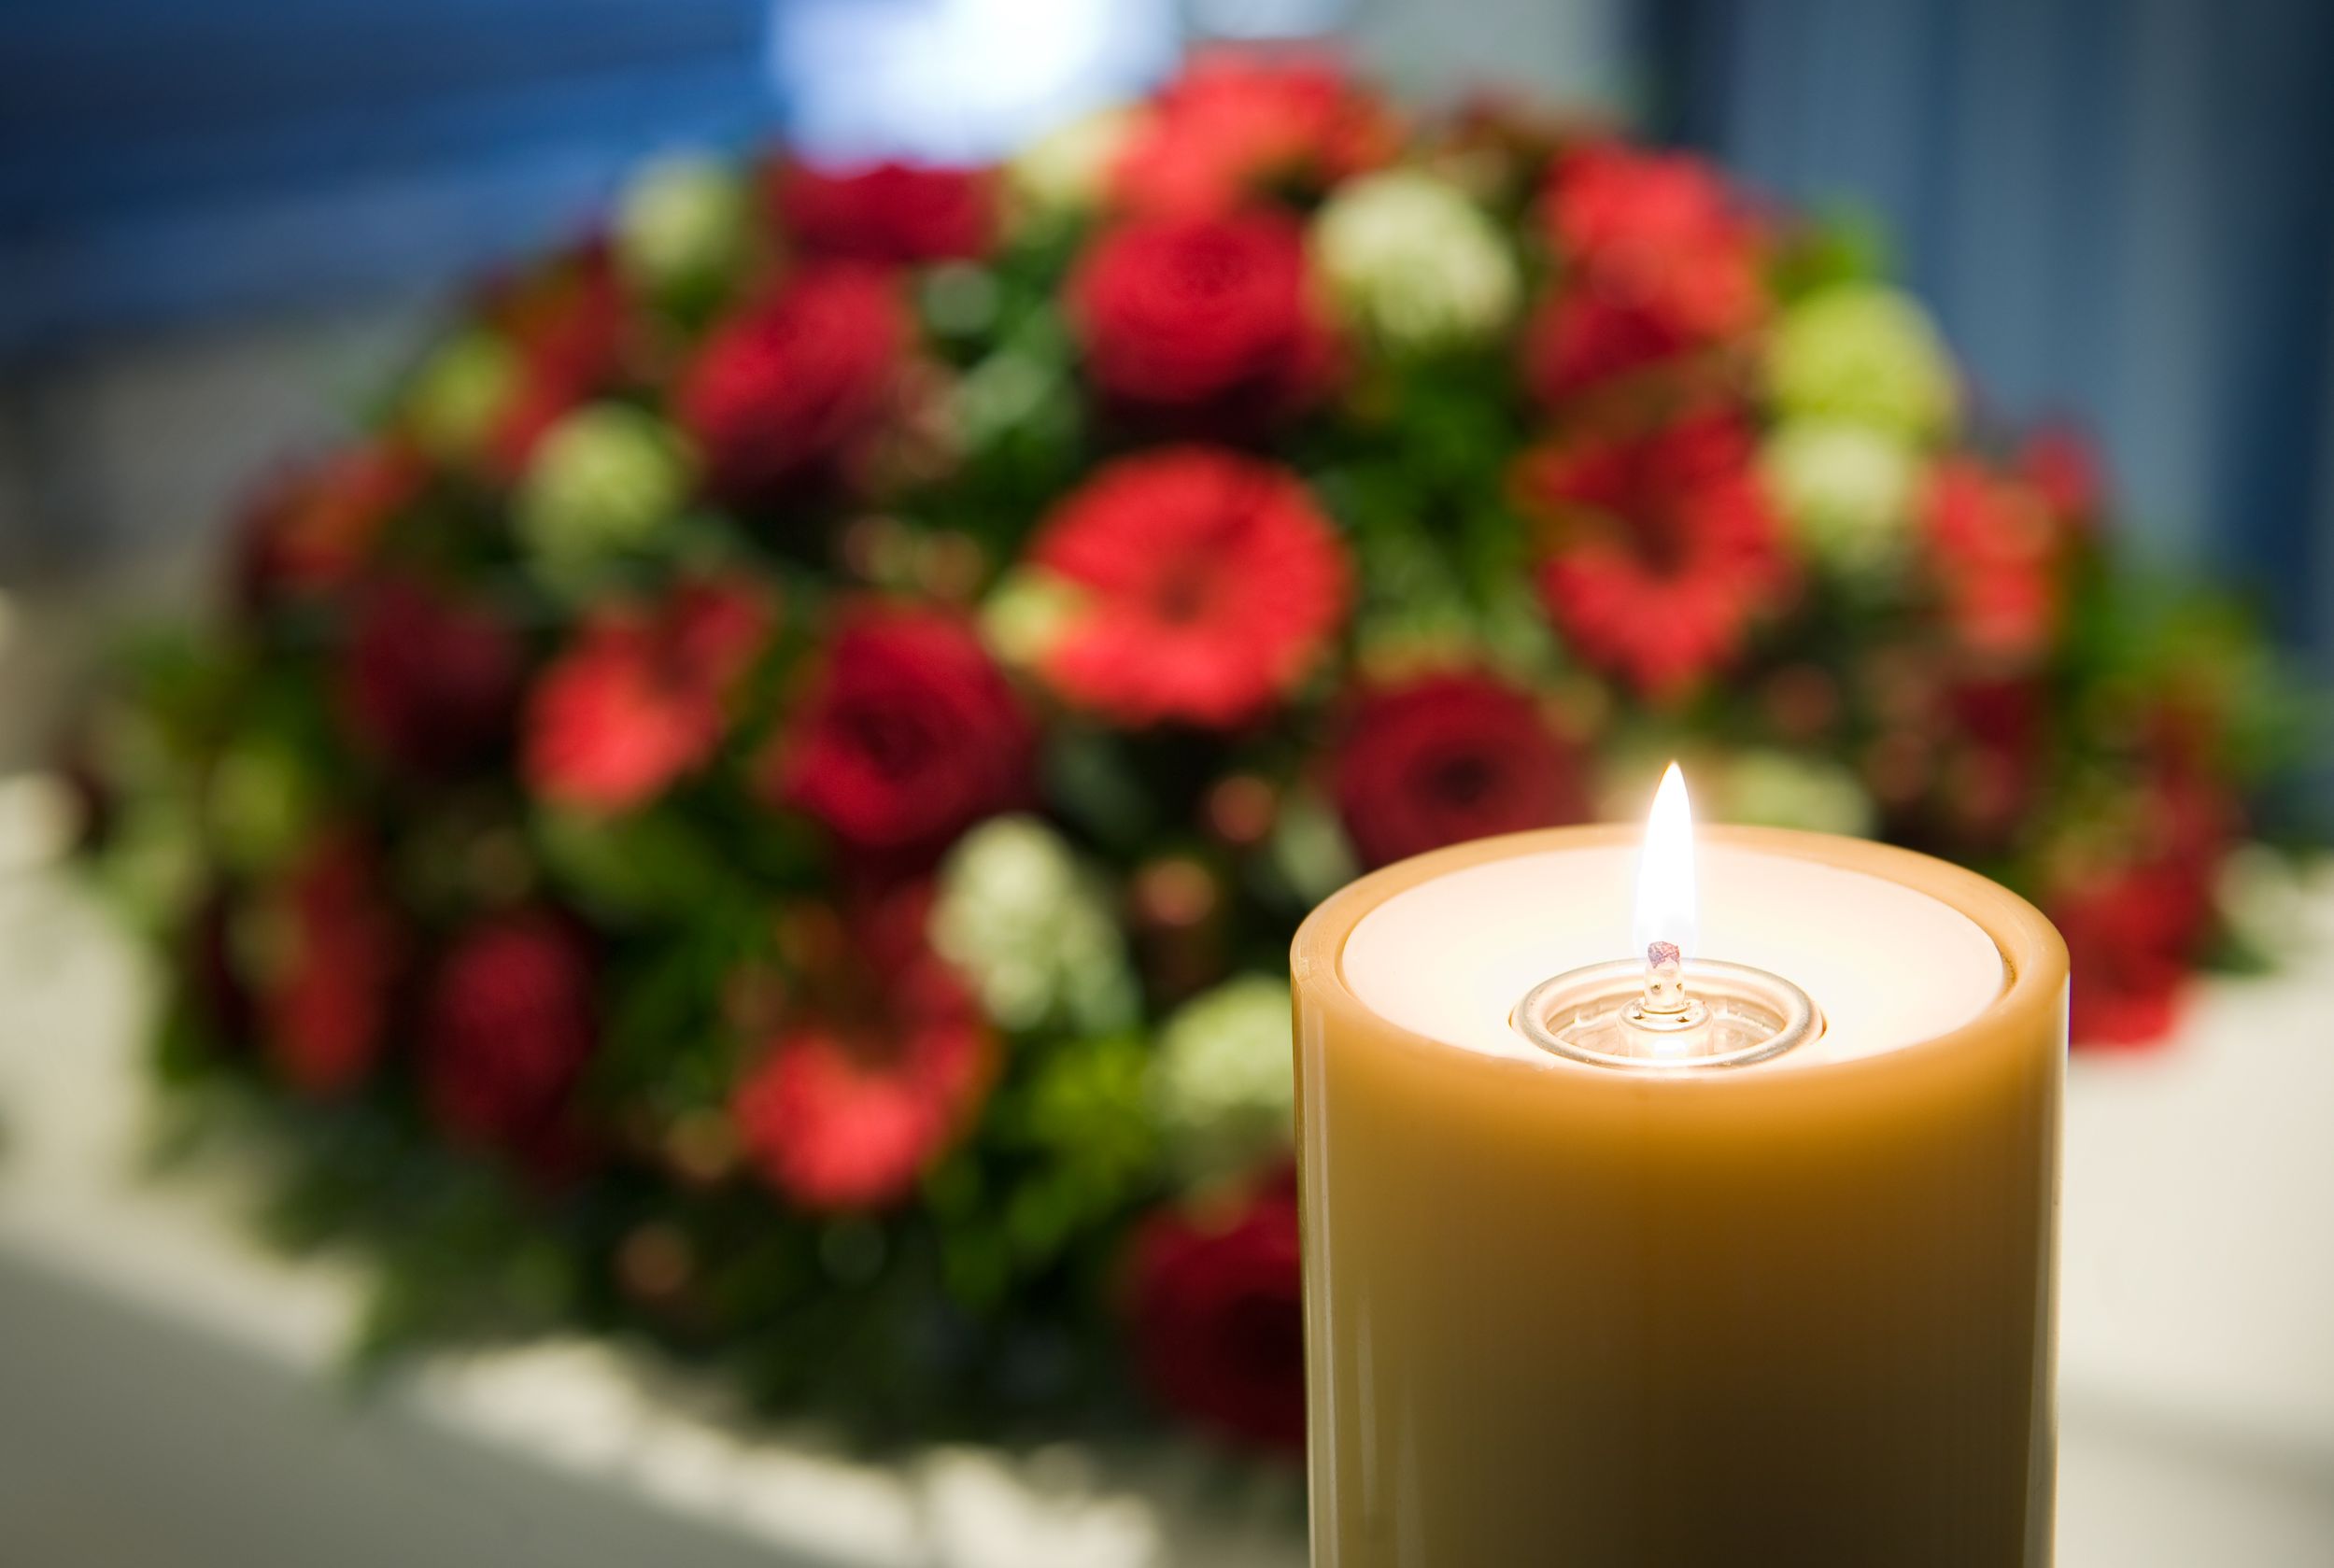 Order Gorgeous Funeral Flowers in Pittsburgh, PA, to Send Your Condolences